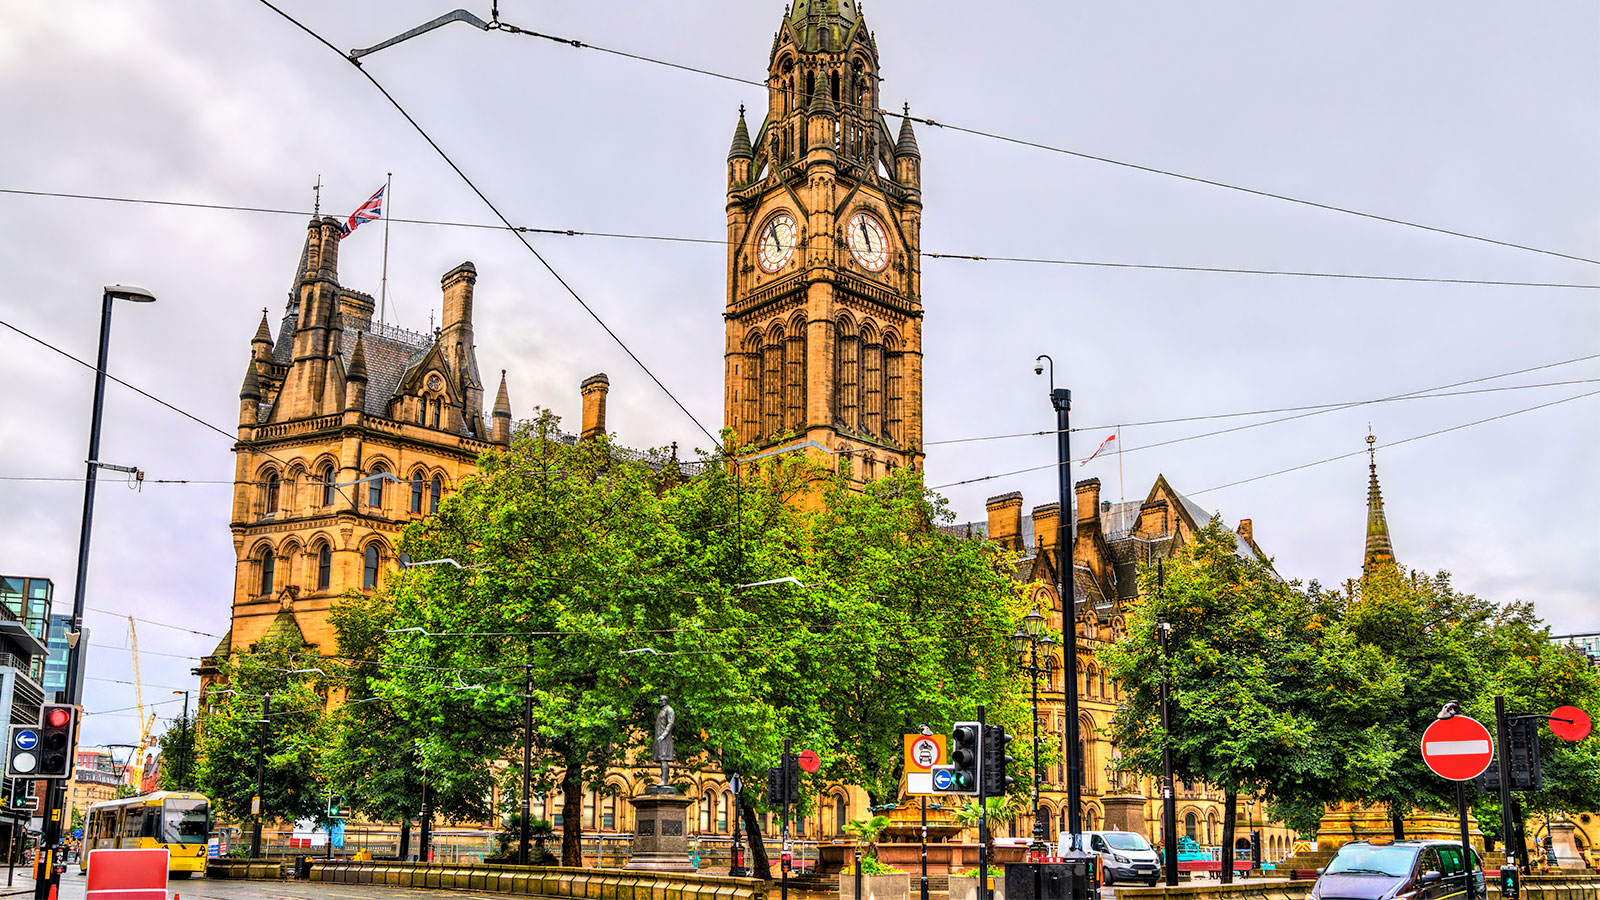 Manchester City Council has committed to installing 200 EV chargers over the next two years.